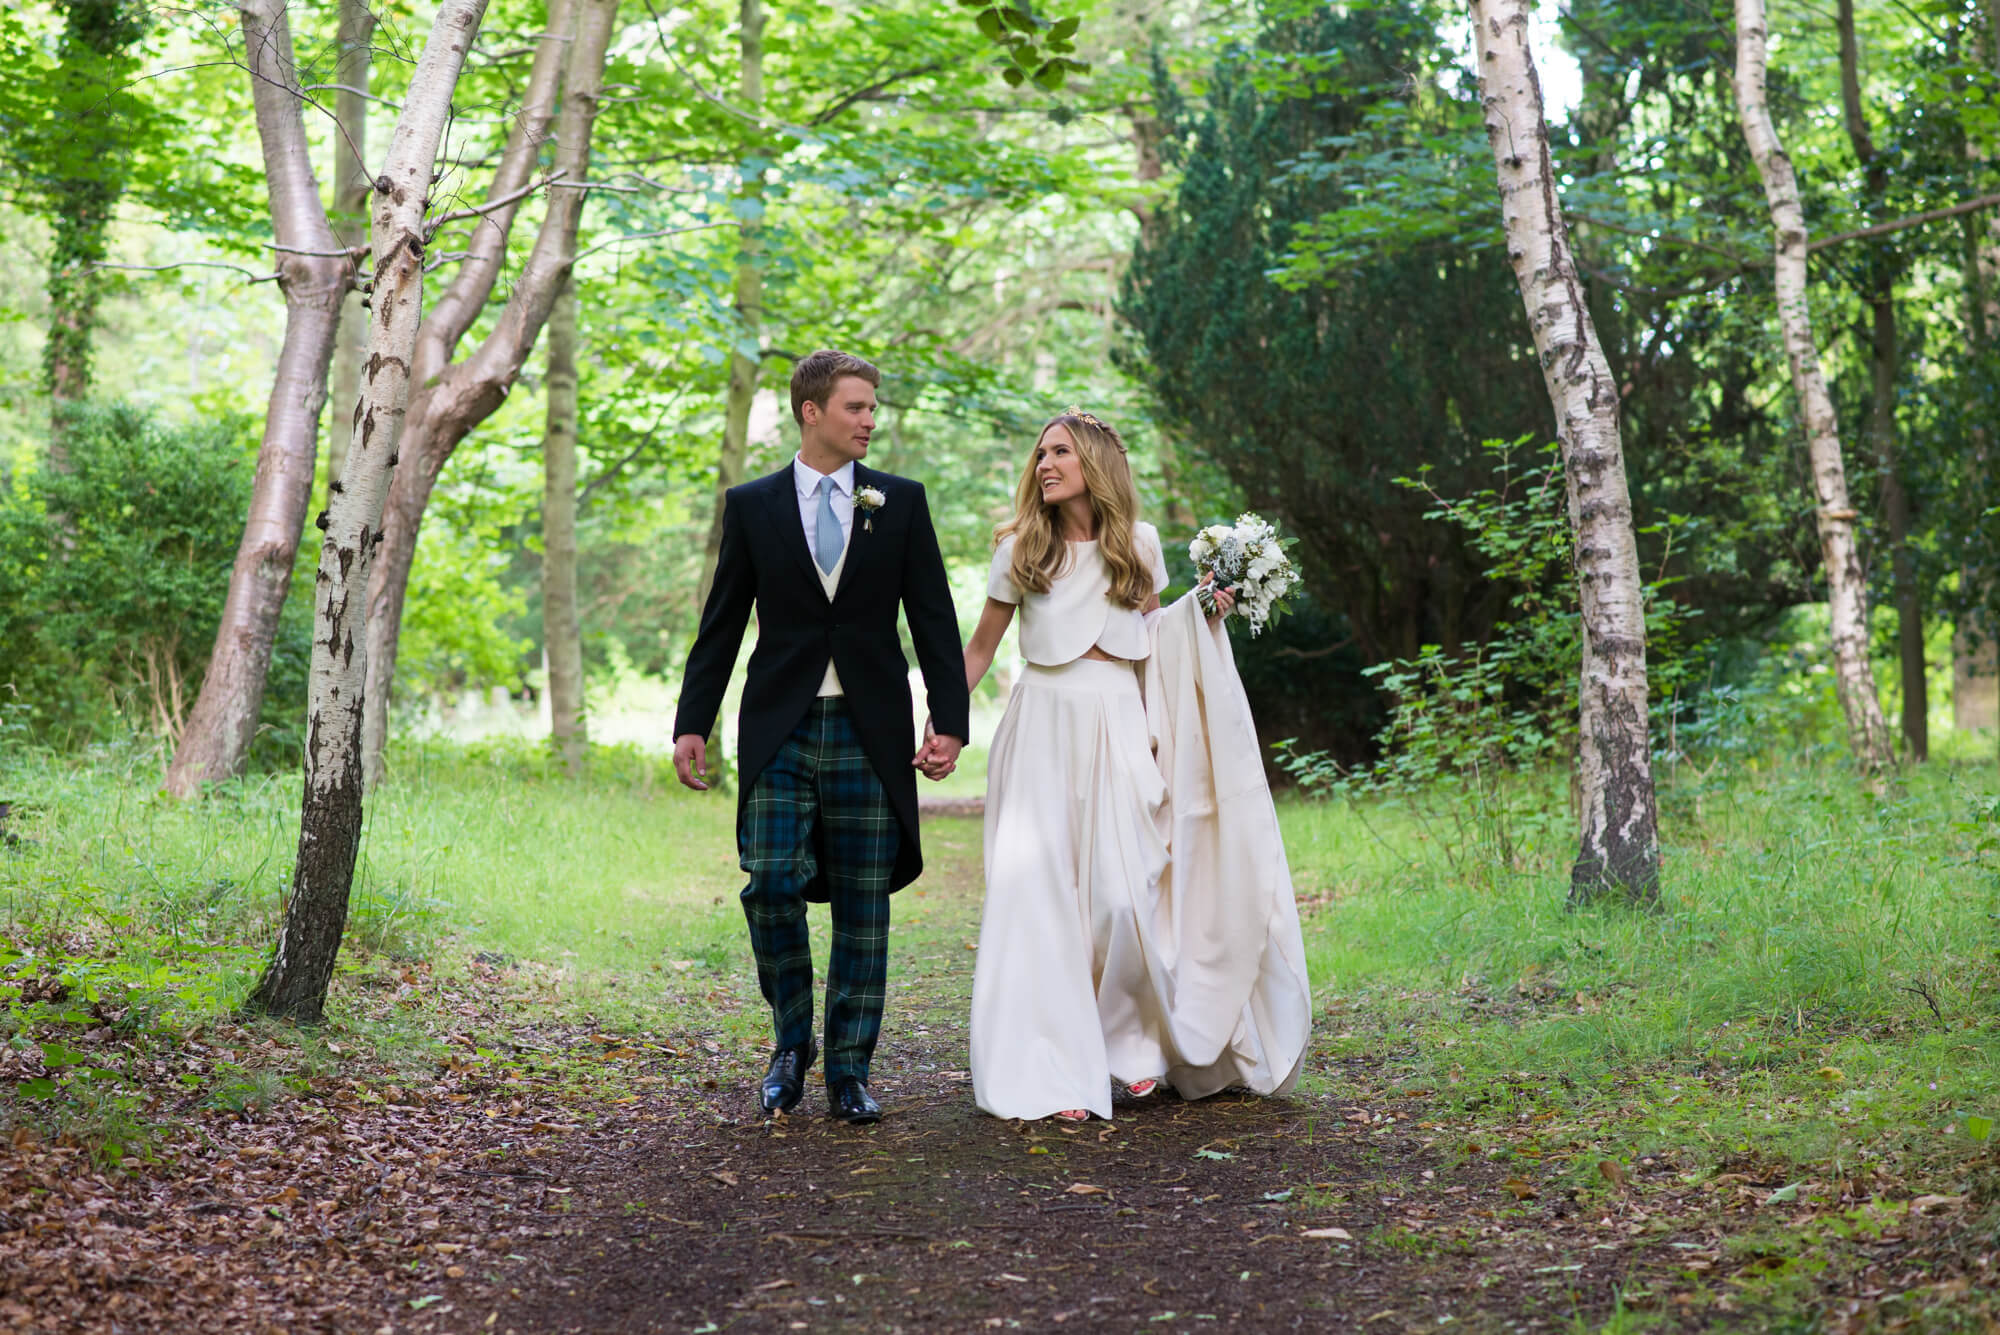 A bride and groom walking in the woods at Gosford House wedding in Scotland by Especially Amy wedding photography